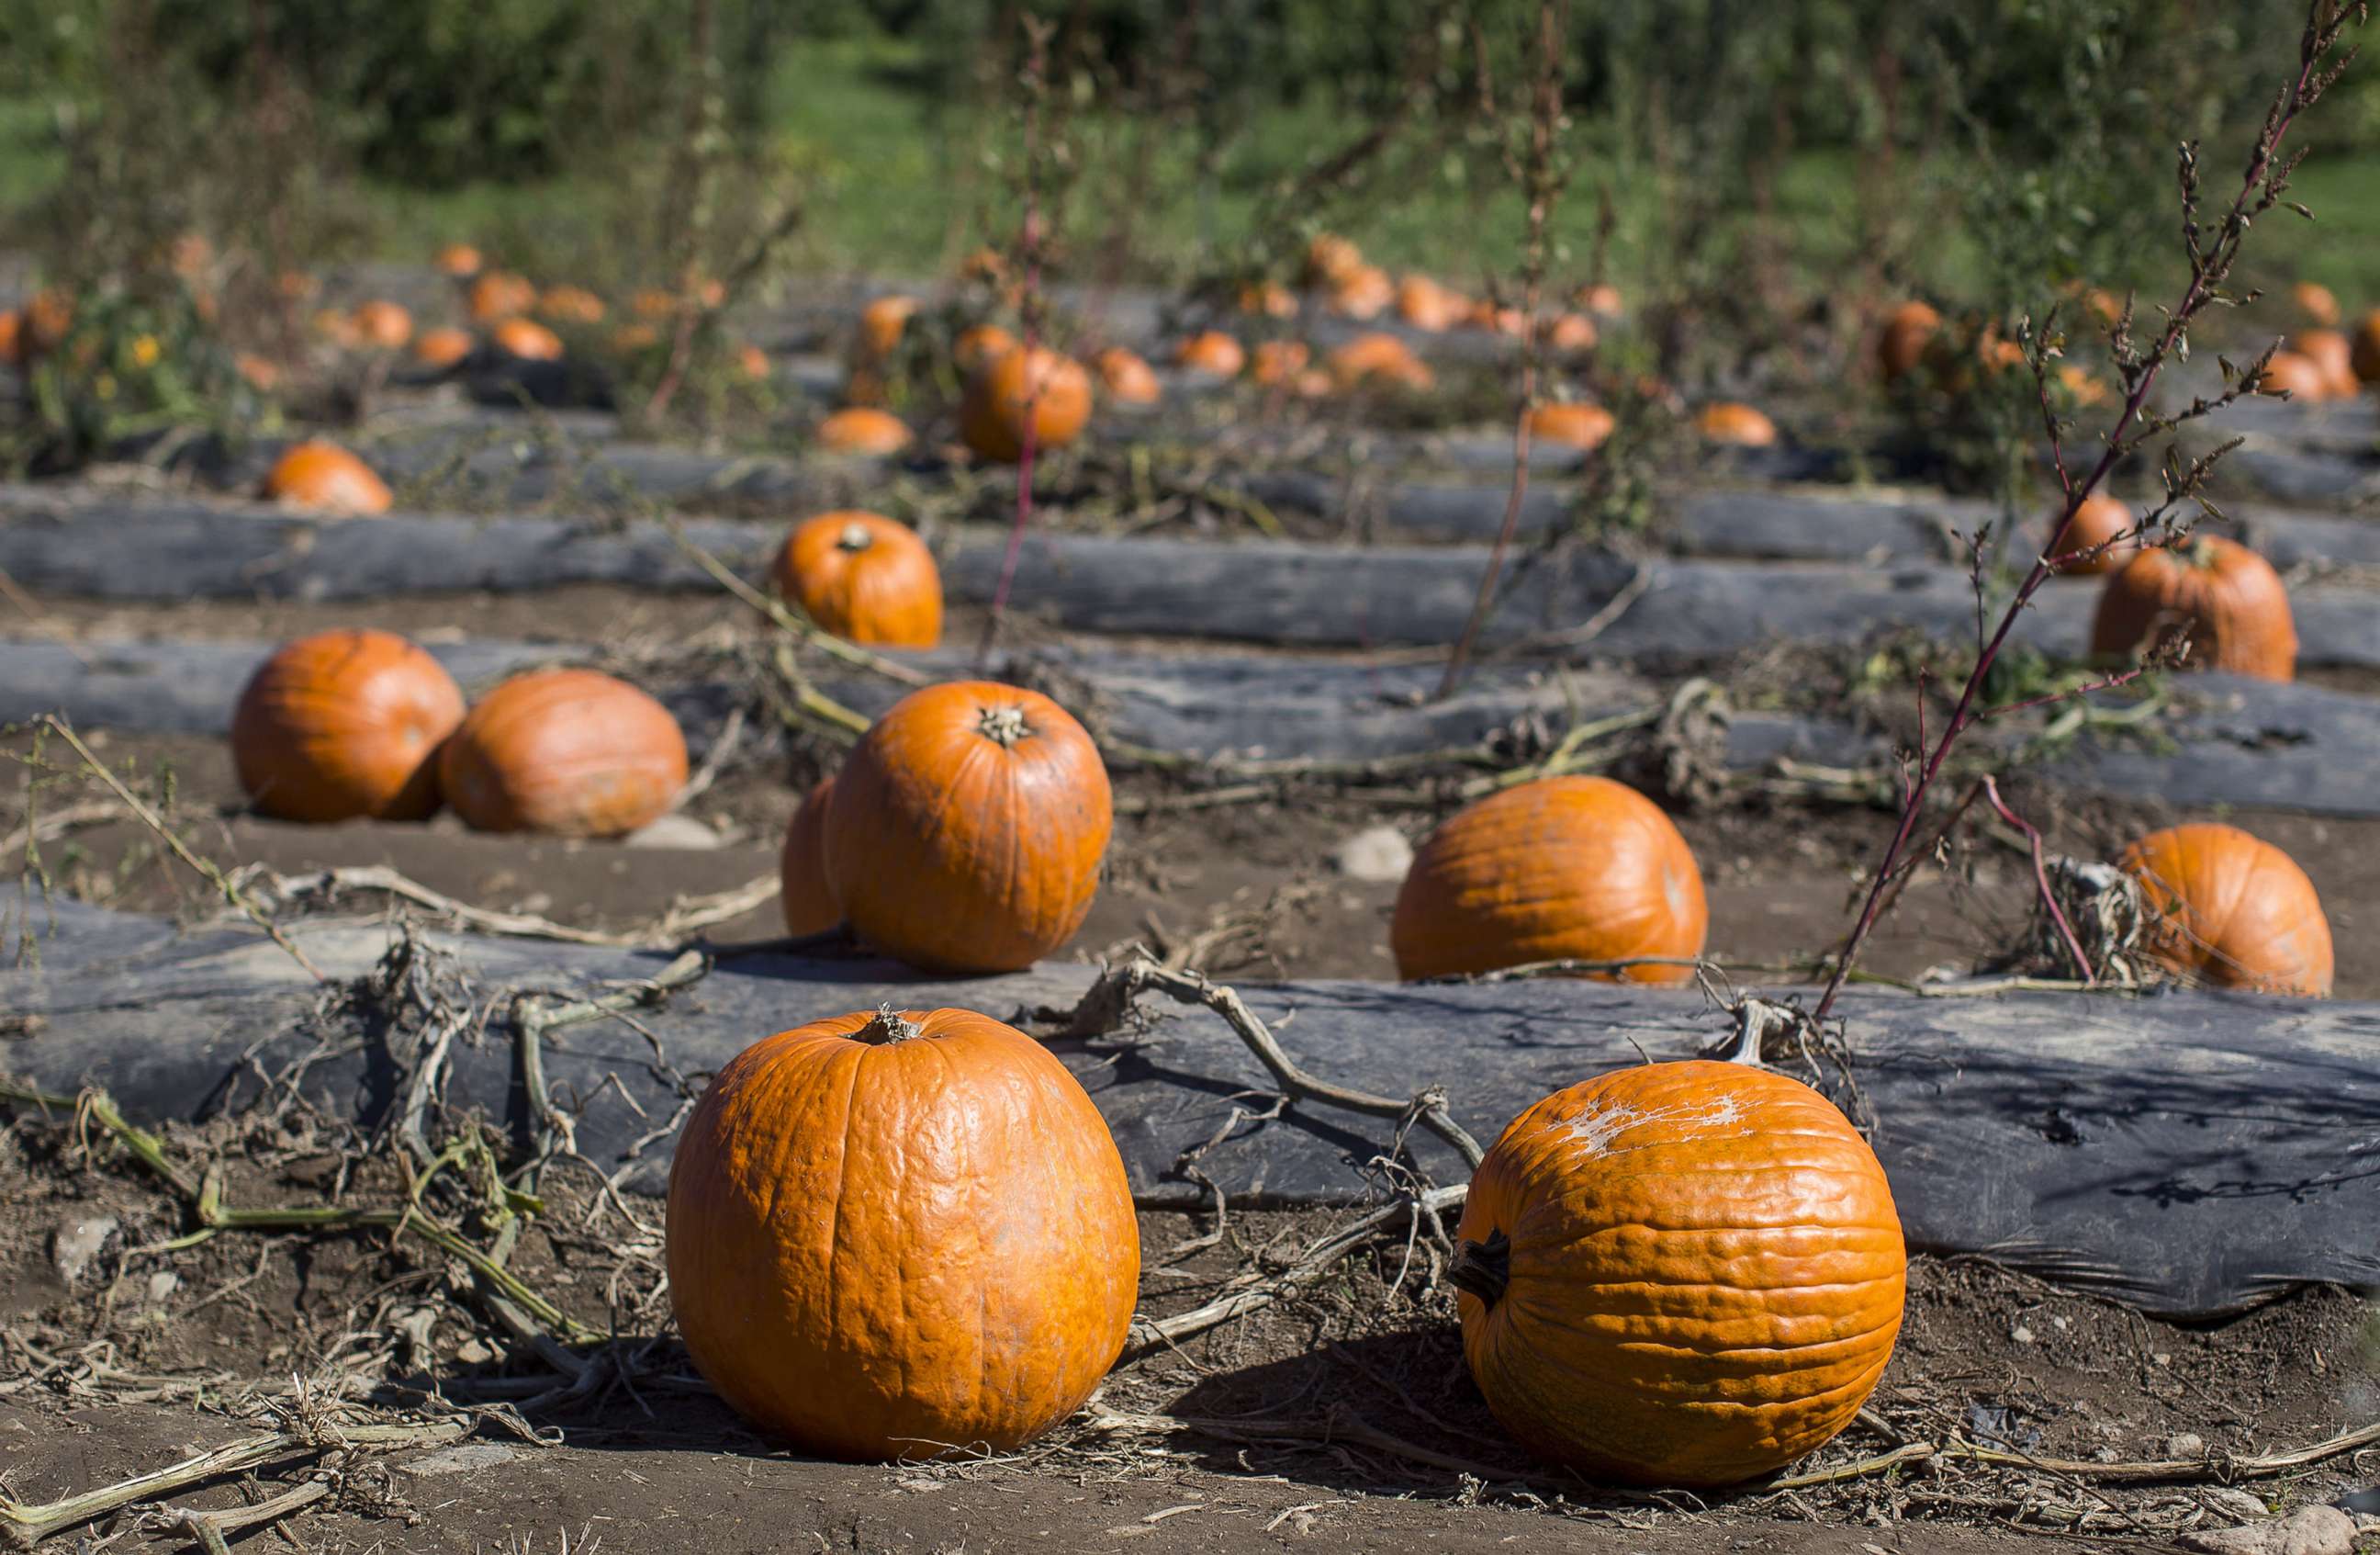 PHOTO: In this Oct. 11, 2016 file photo pumpkins of various sizes sit in a patch at Shelburne Farm in Stow, Mass.